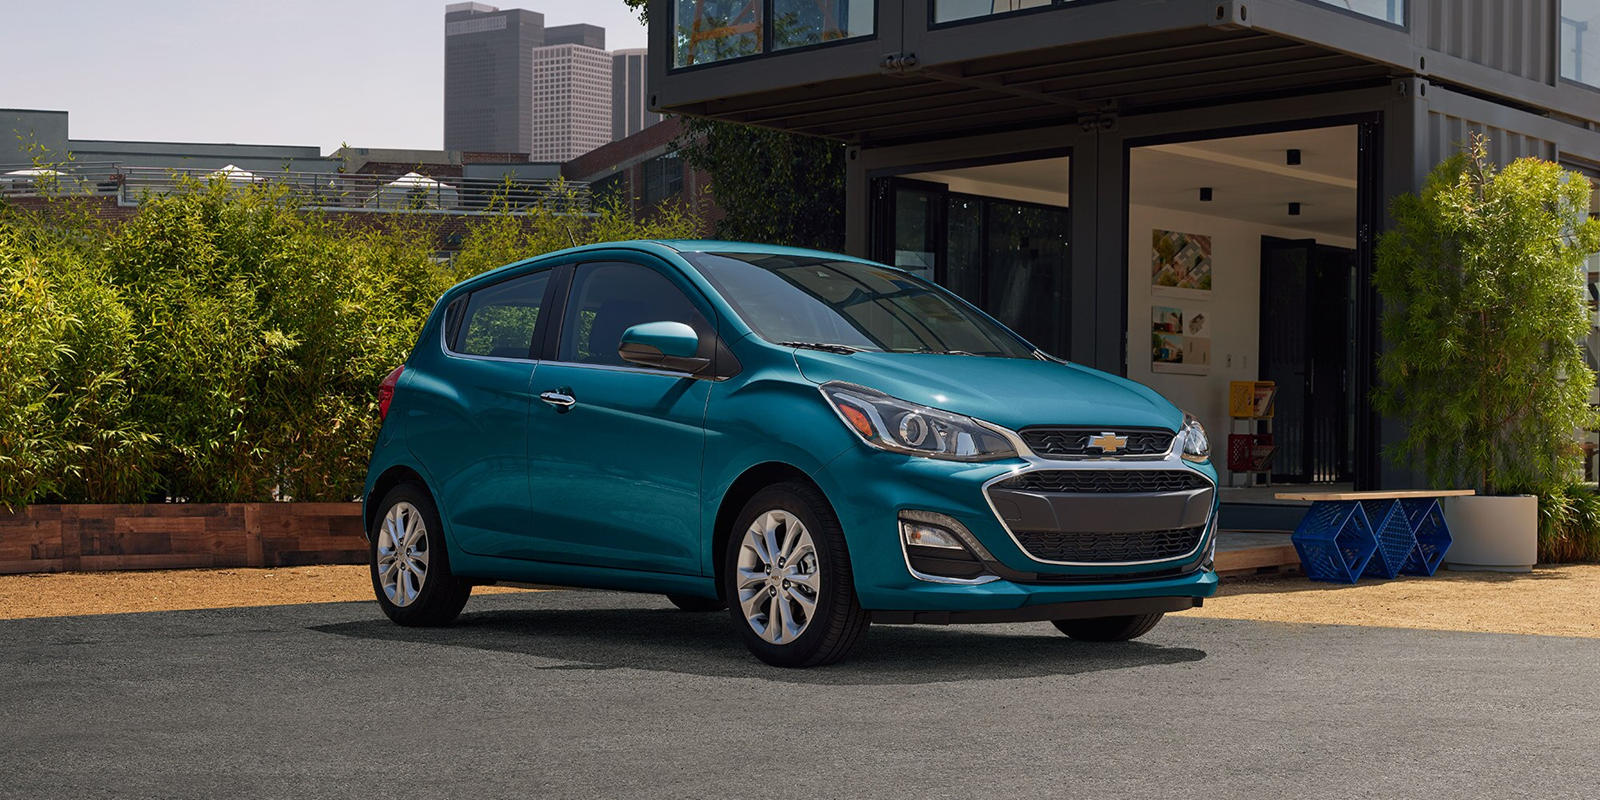 2020 Chevrolet Spark Front Angle View